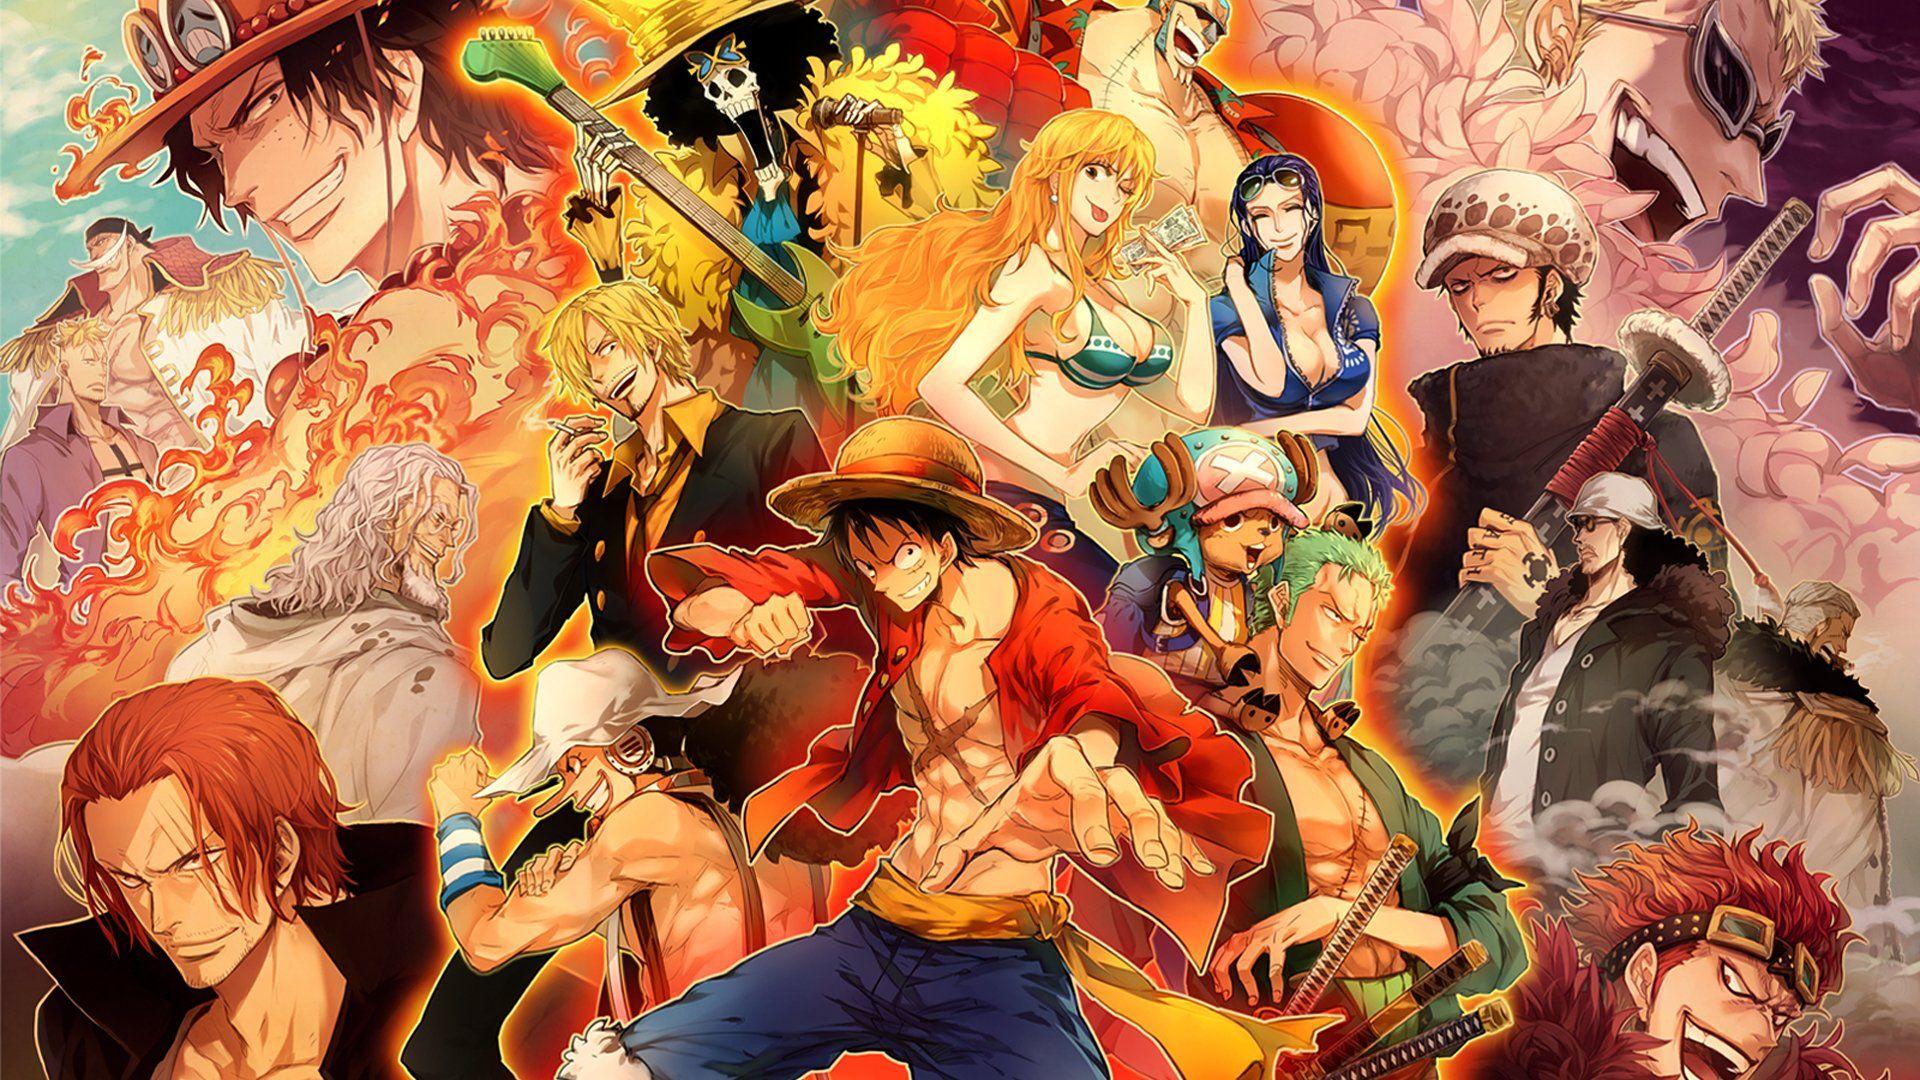 1920 x 1080 · jpeg - One Piece PC Wallpapers - Top Free One Piece PC Backgrounds ...